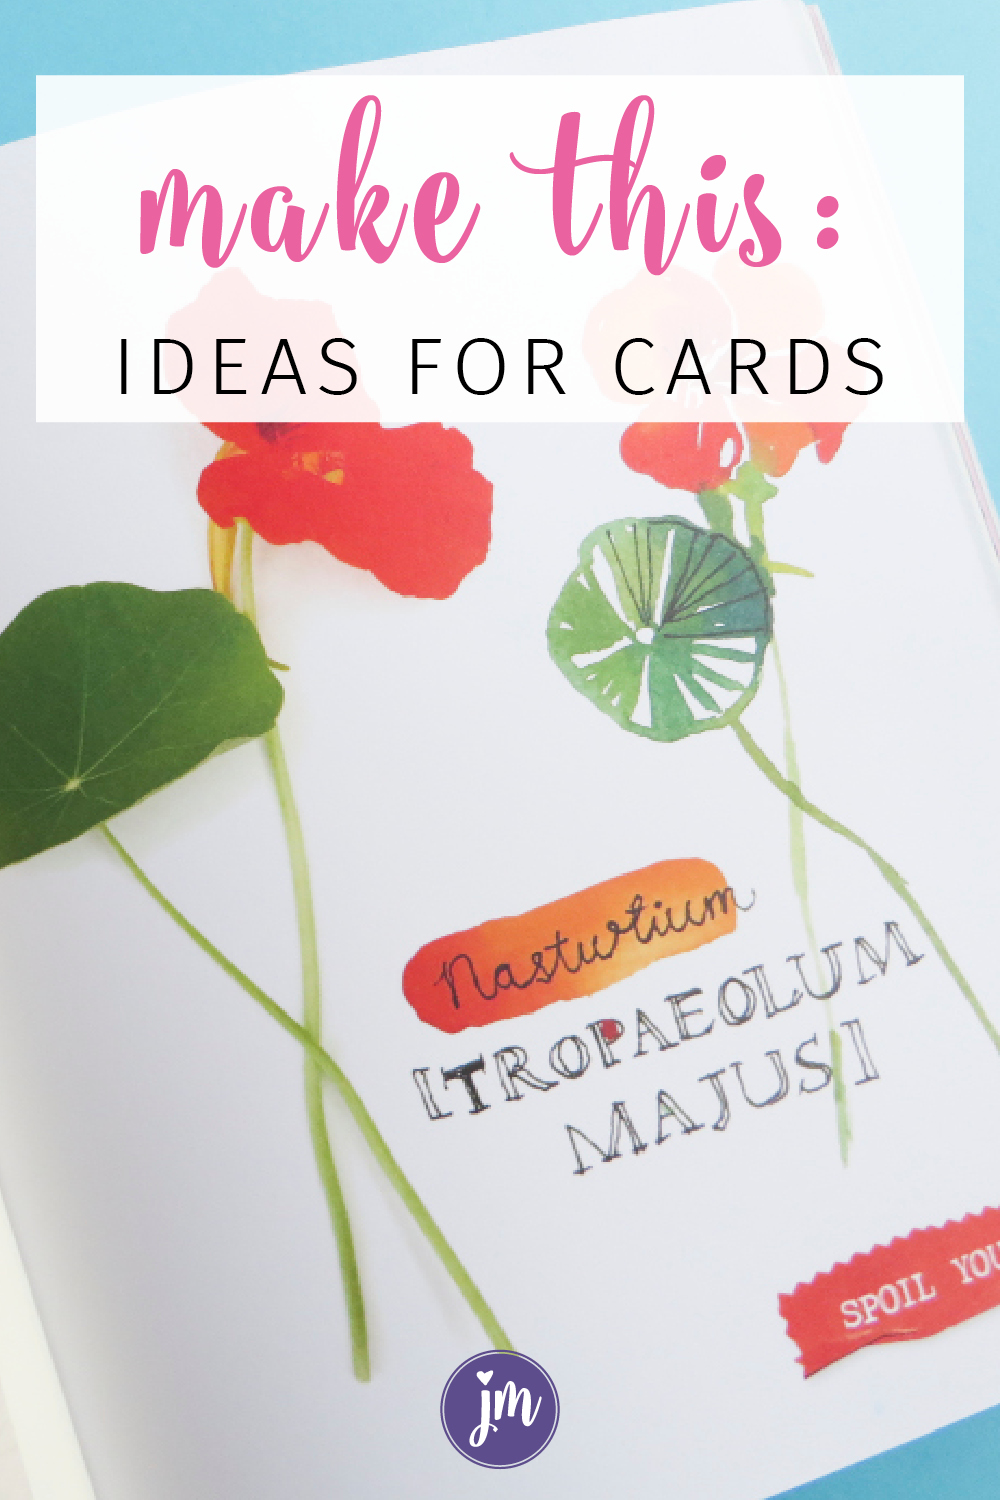 Inspired by Flow Magazine: Ideas for Cards & Art